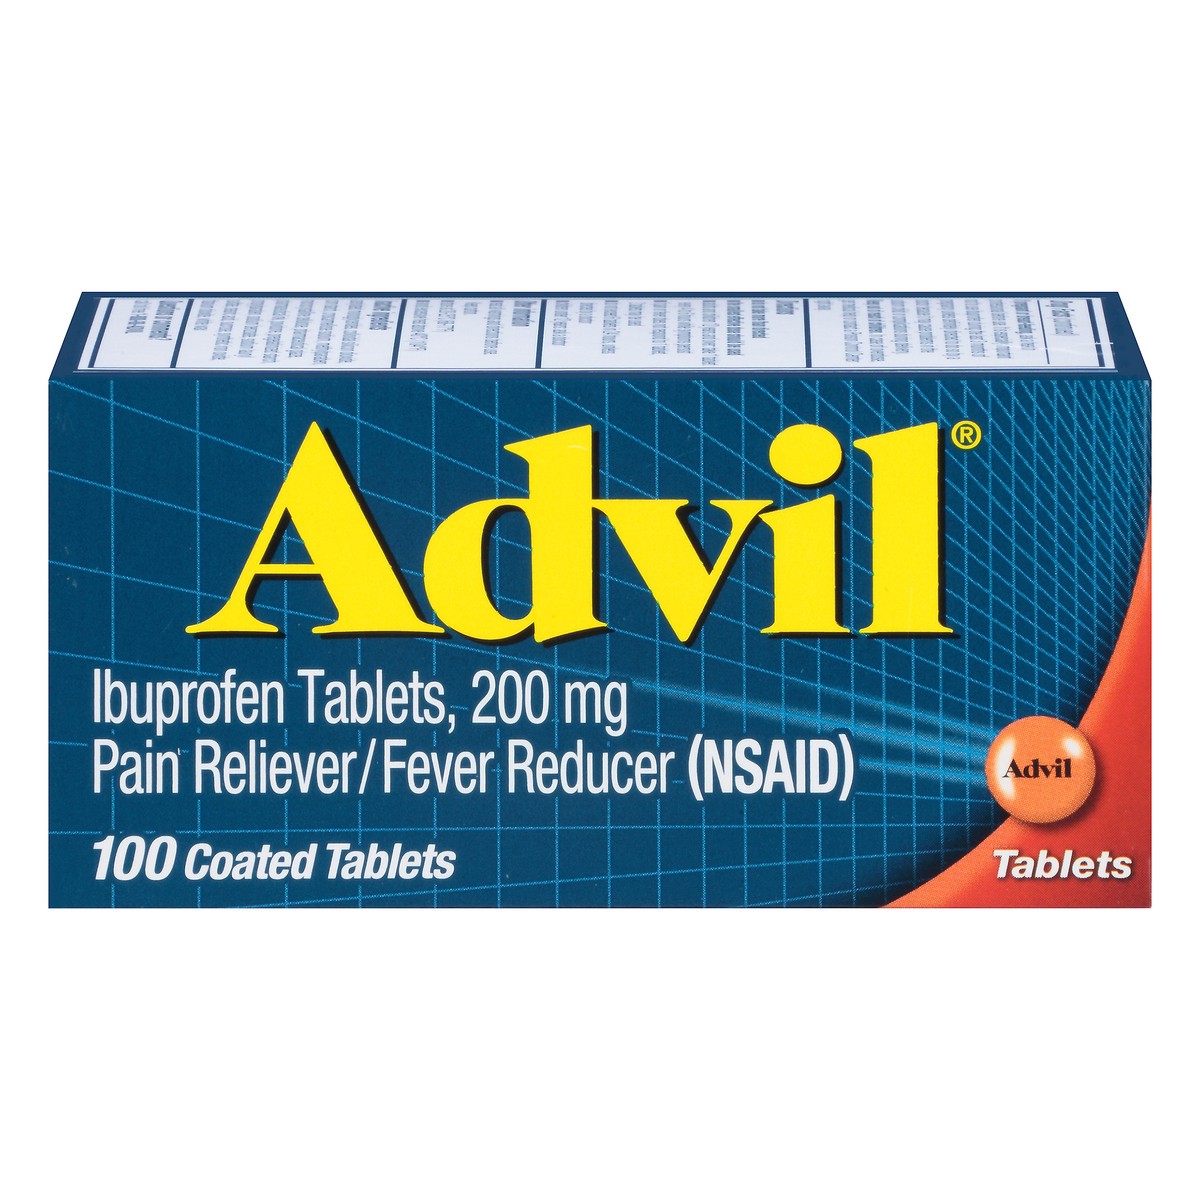 slide 6 of 8, Advil Coated Tablets Pain Ibuprofen 200mg Reliever/Fever Reducer, 100 ct